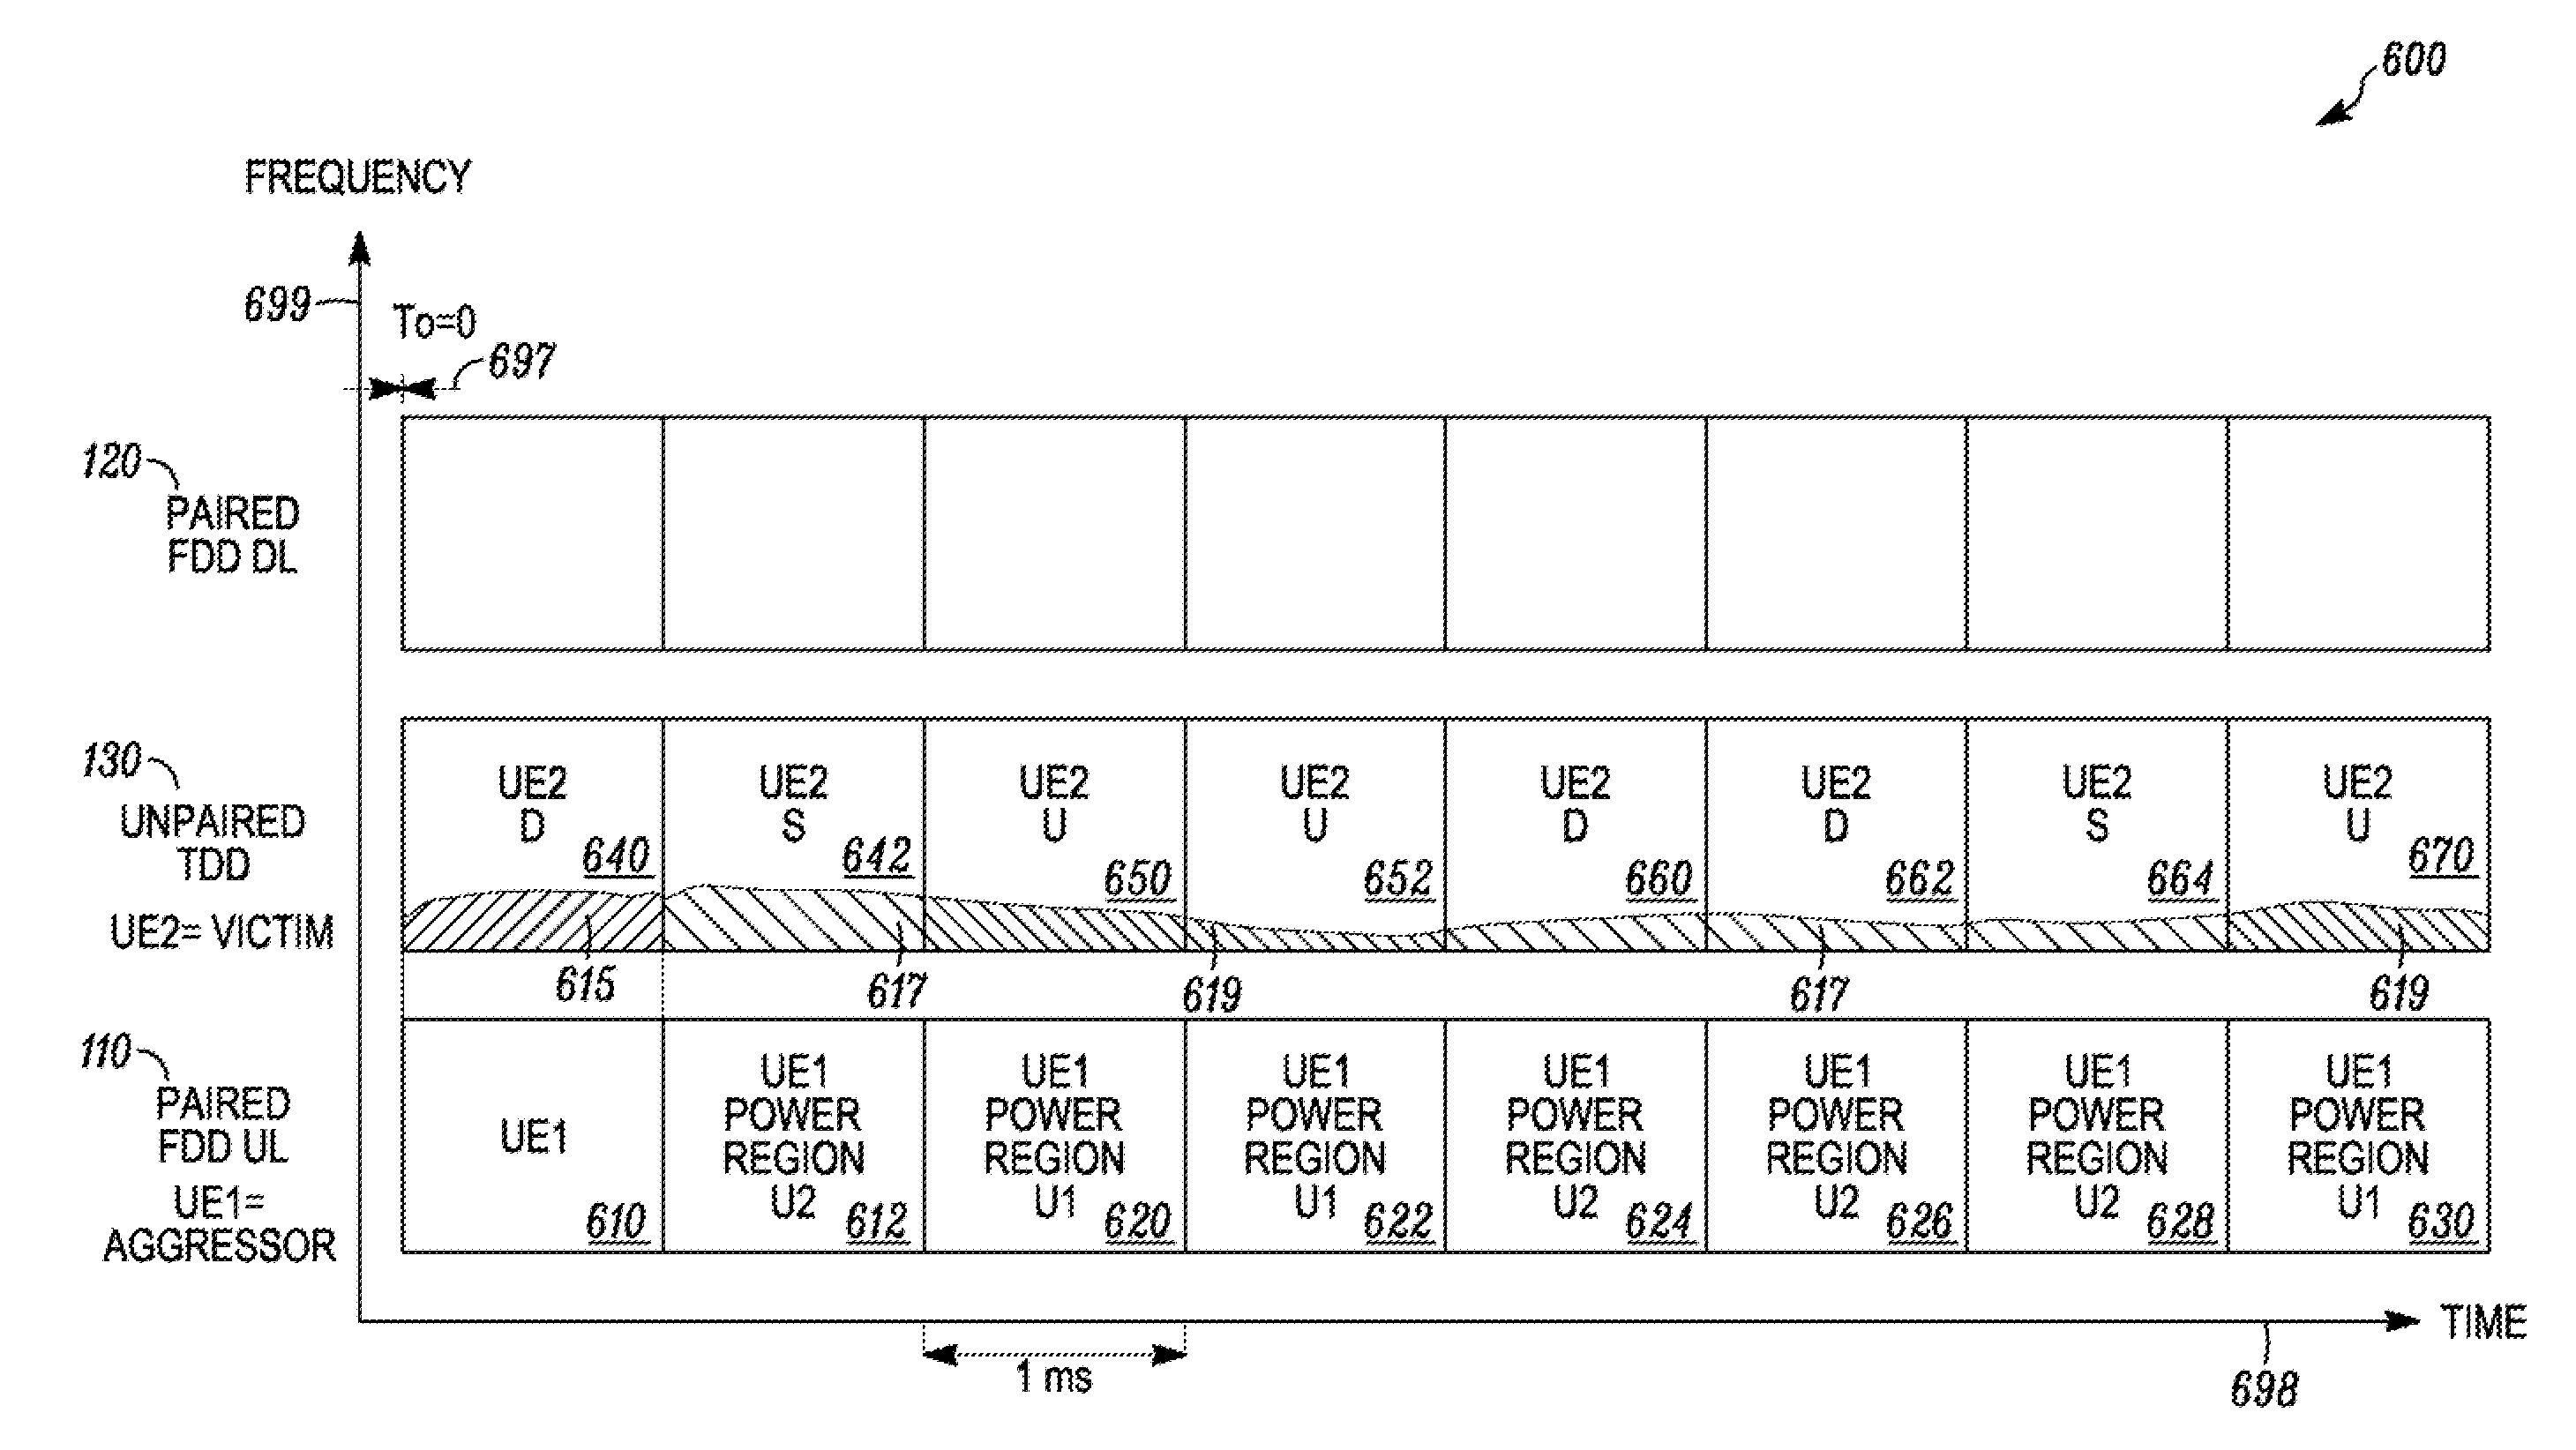 Method and Apparatus for Multi-Radio Coexistence on Adjacent Frequency Bands